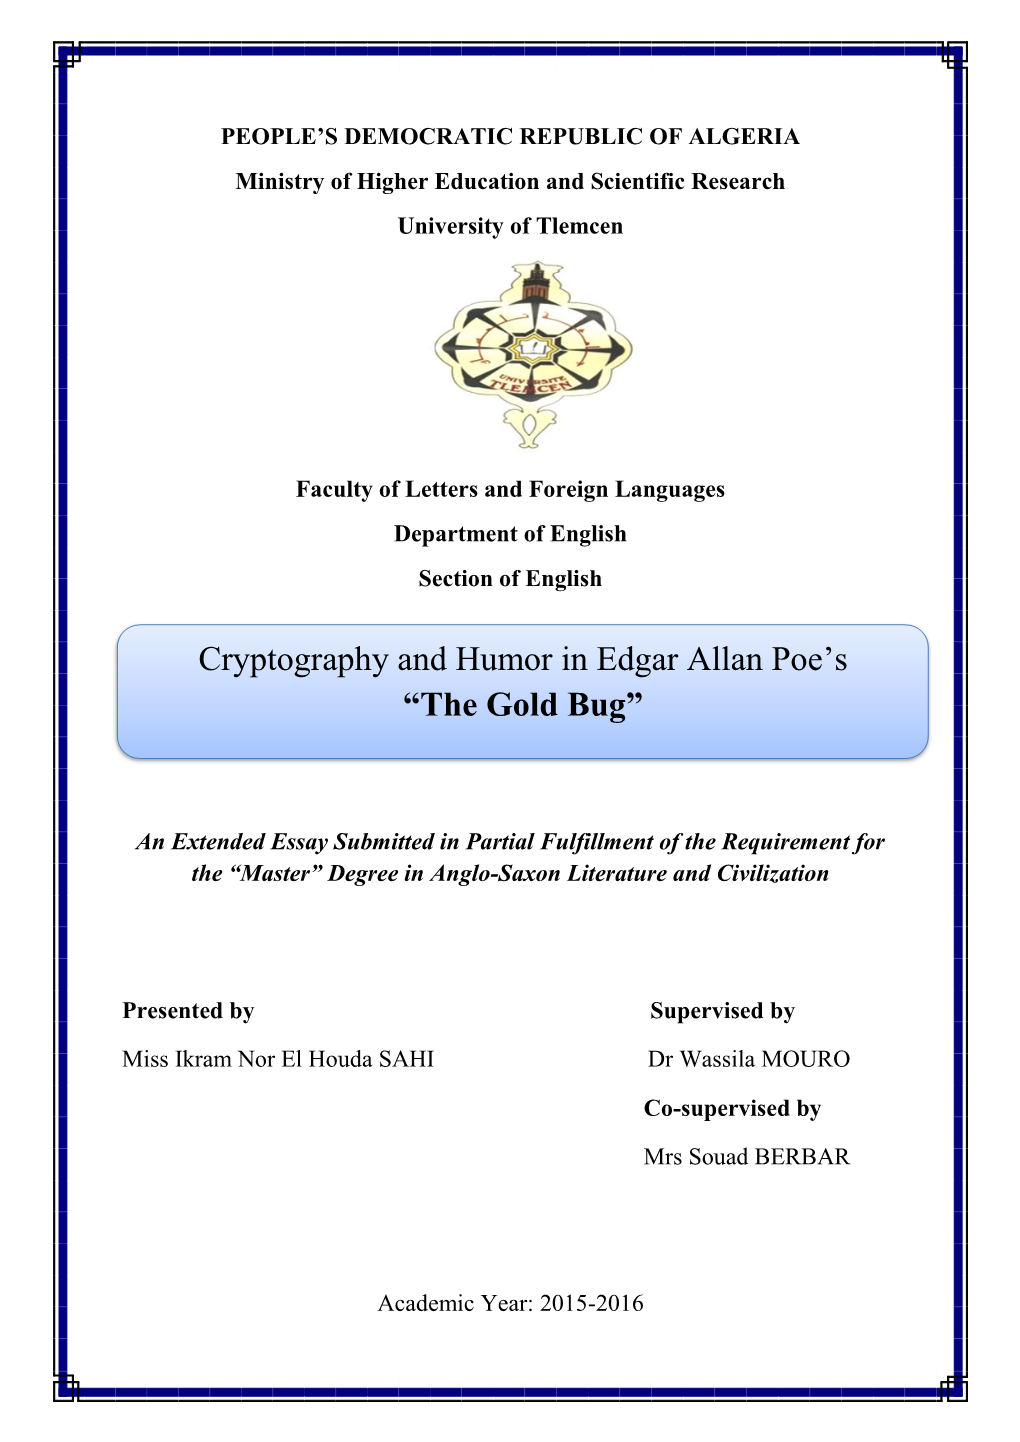 Cryptography and Humor in Edgar Allan Poe's “The Gold Bug”